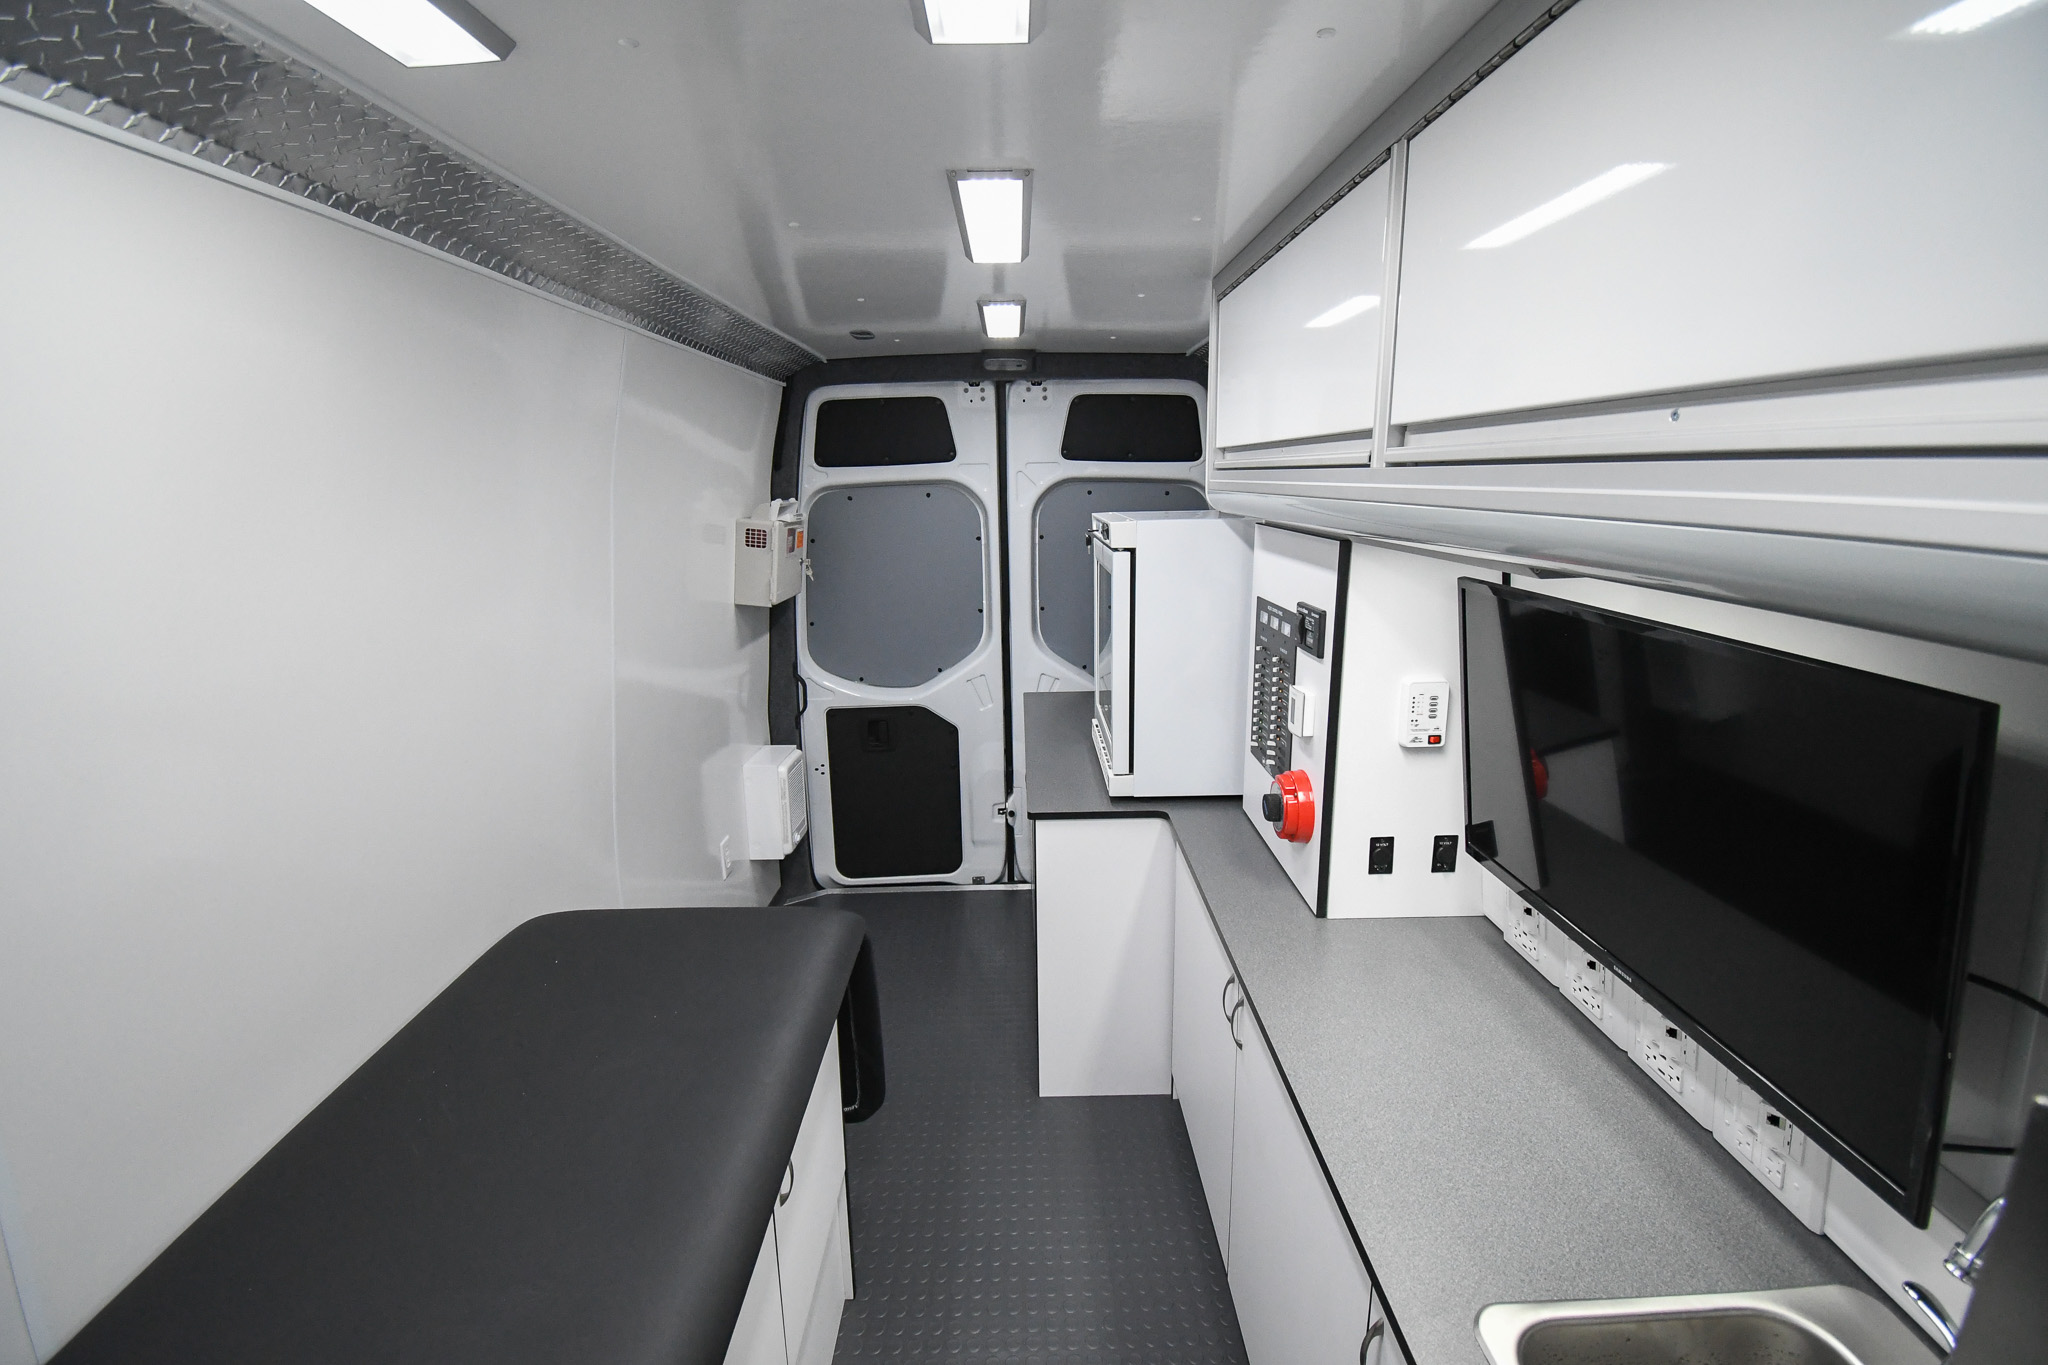 A front-to-back view inside the units for Greenville, SC.